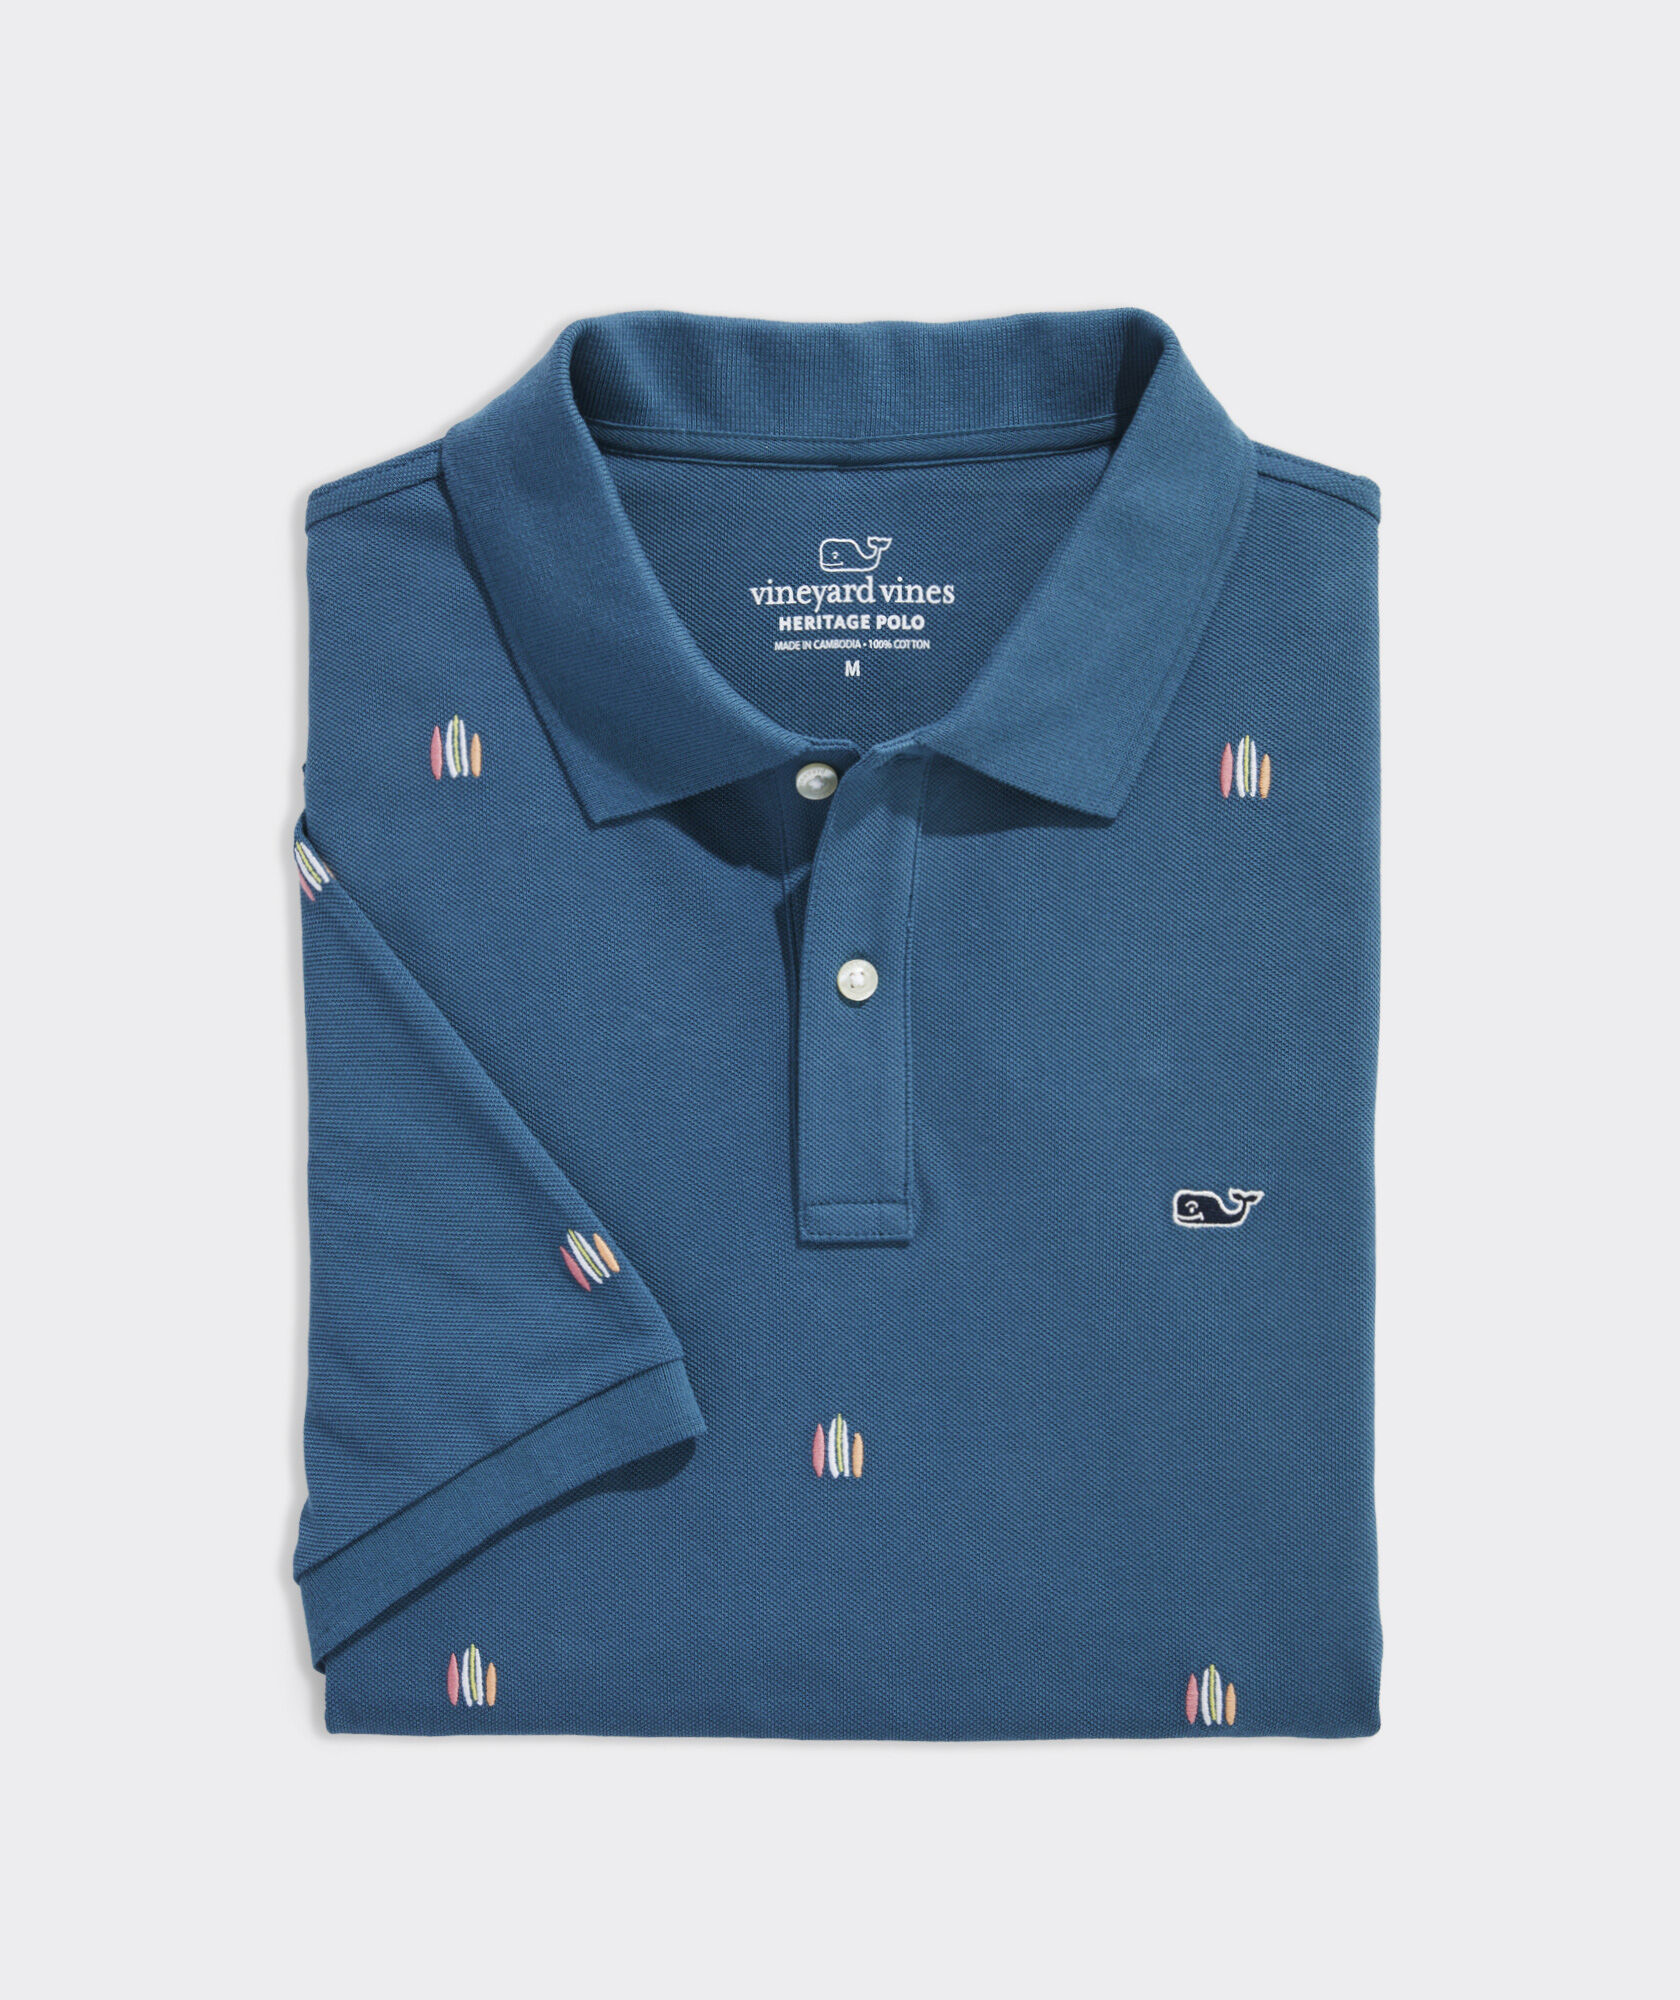 Shop Novelty Embroidered Heritage Pique Polo at vineyard vines